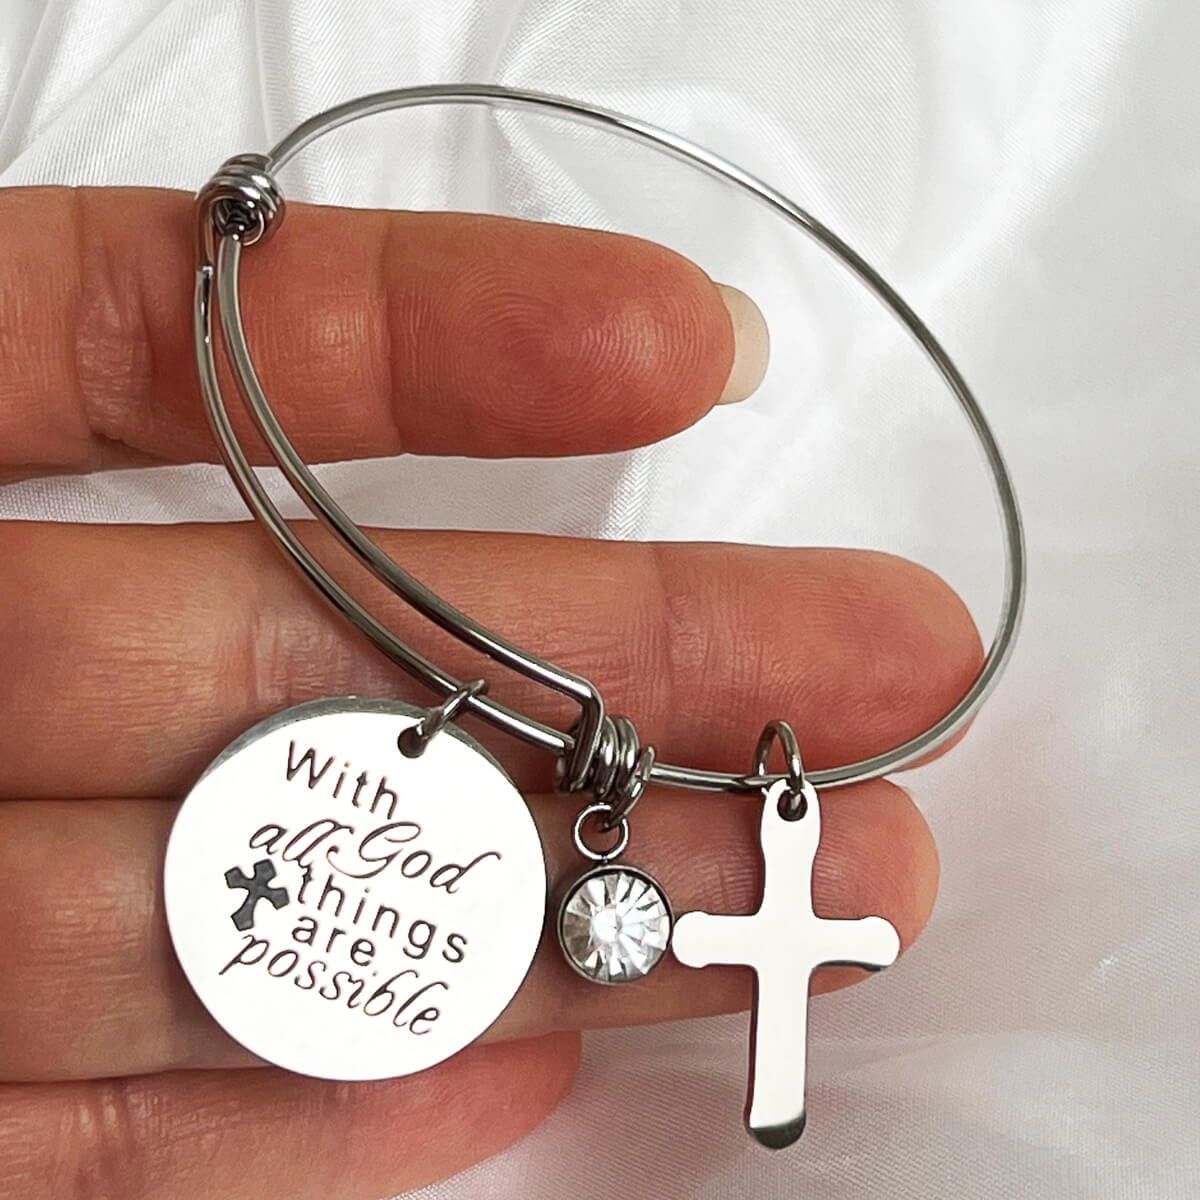 With God All Things Are Possible Bracelet Stainless Steel Jewelry